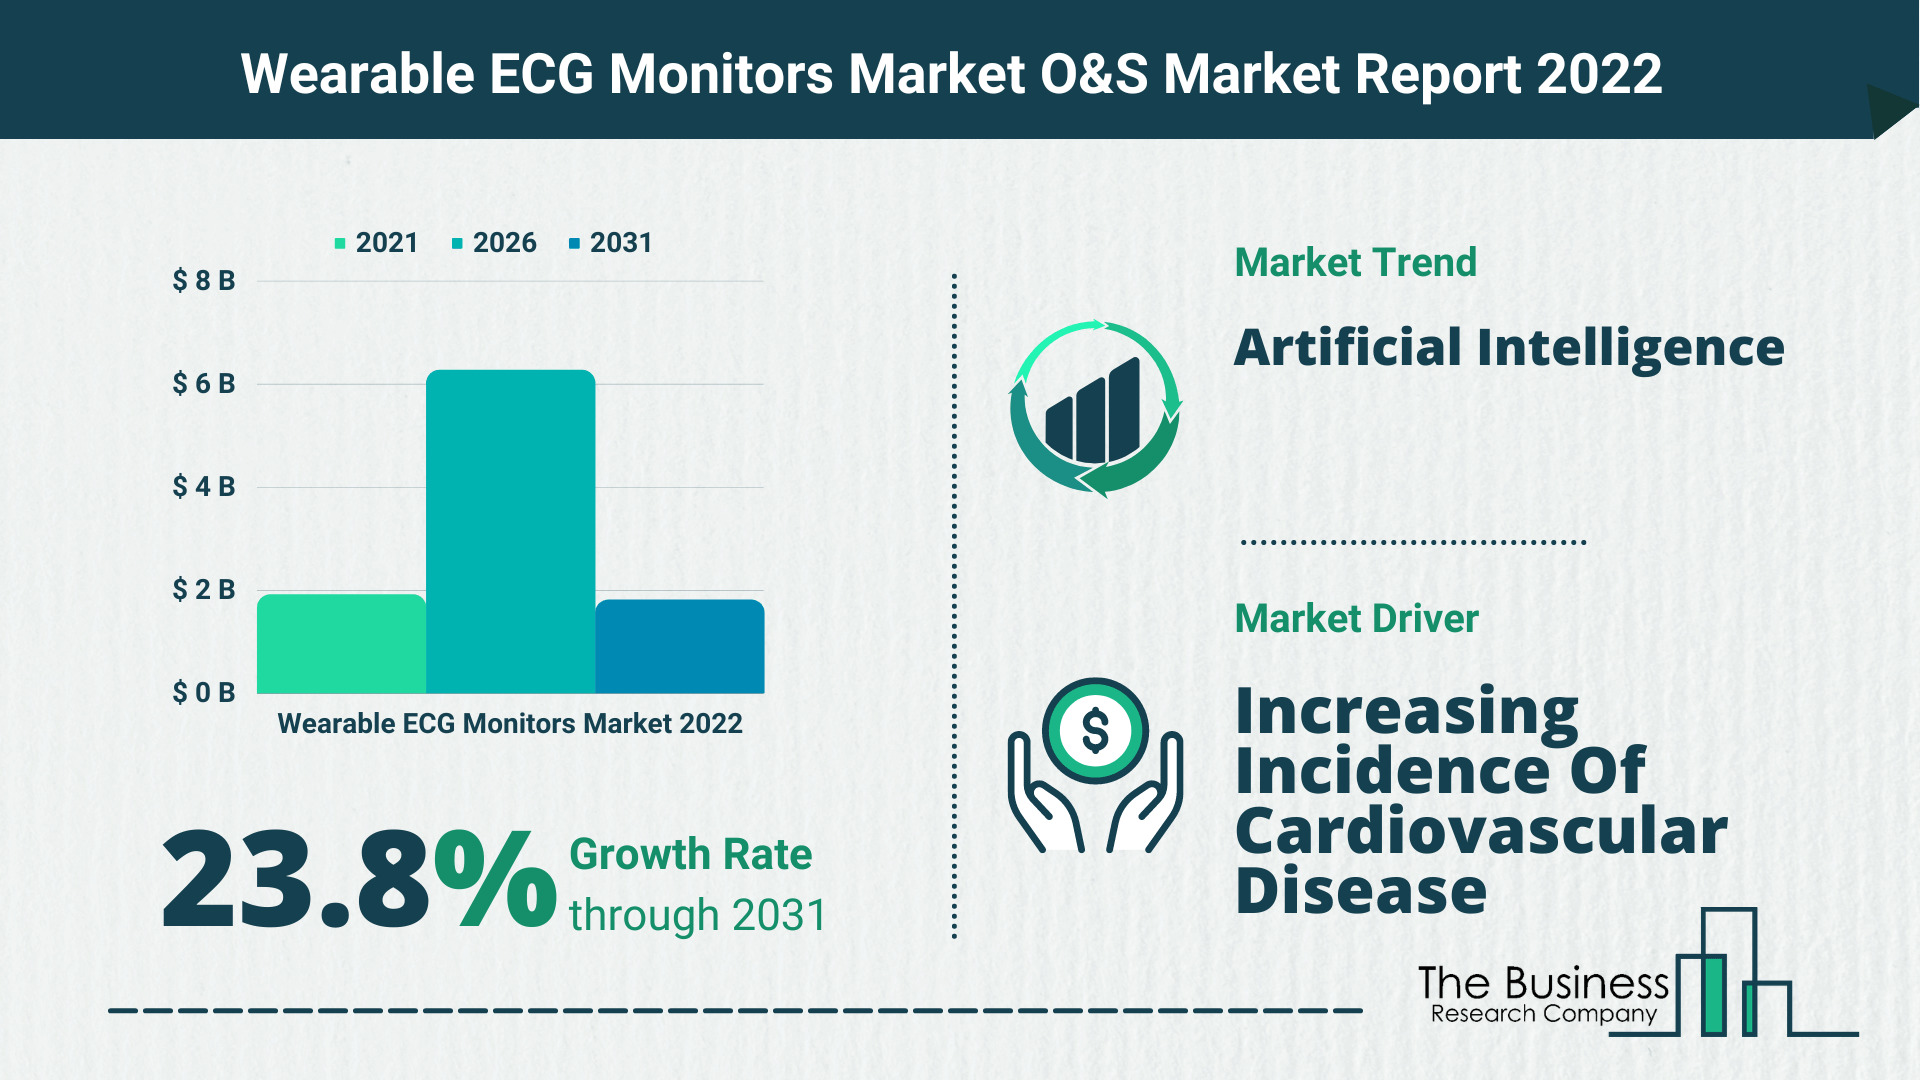 Wearable ECG Monitors Market Growth Analysis Till 2030 By The Business Research Company